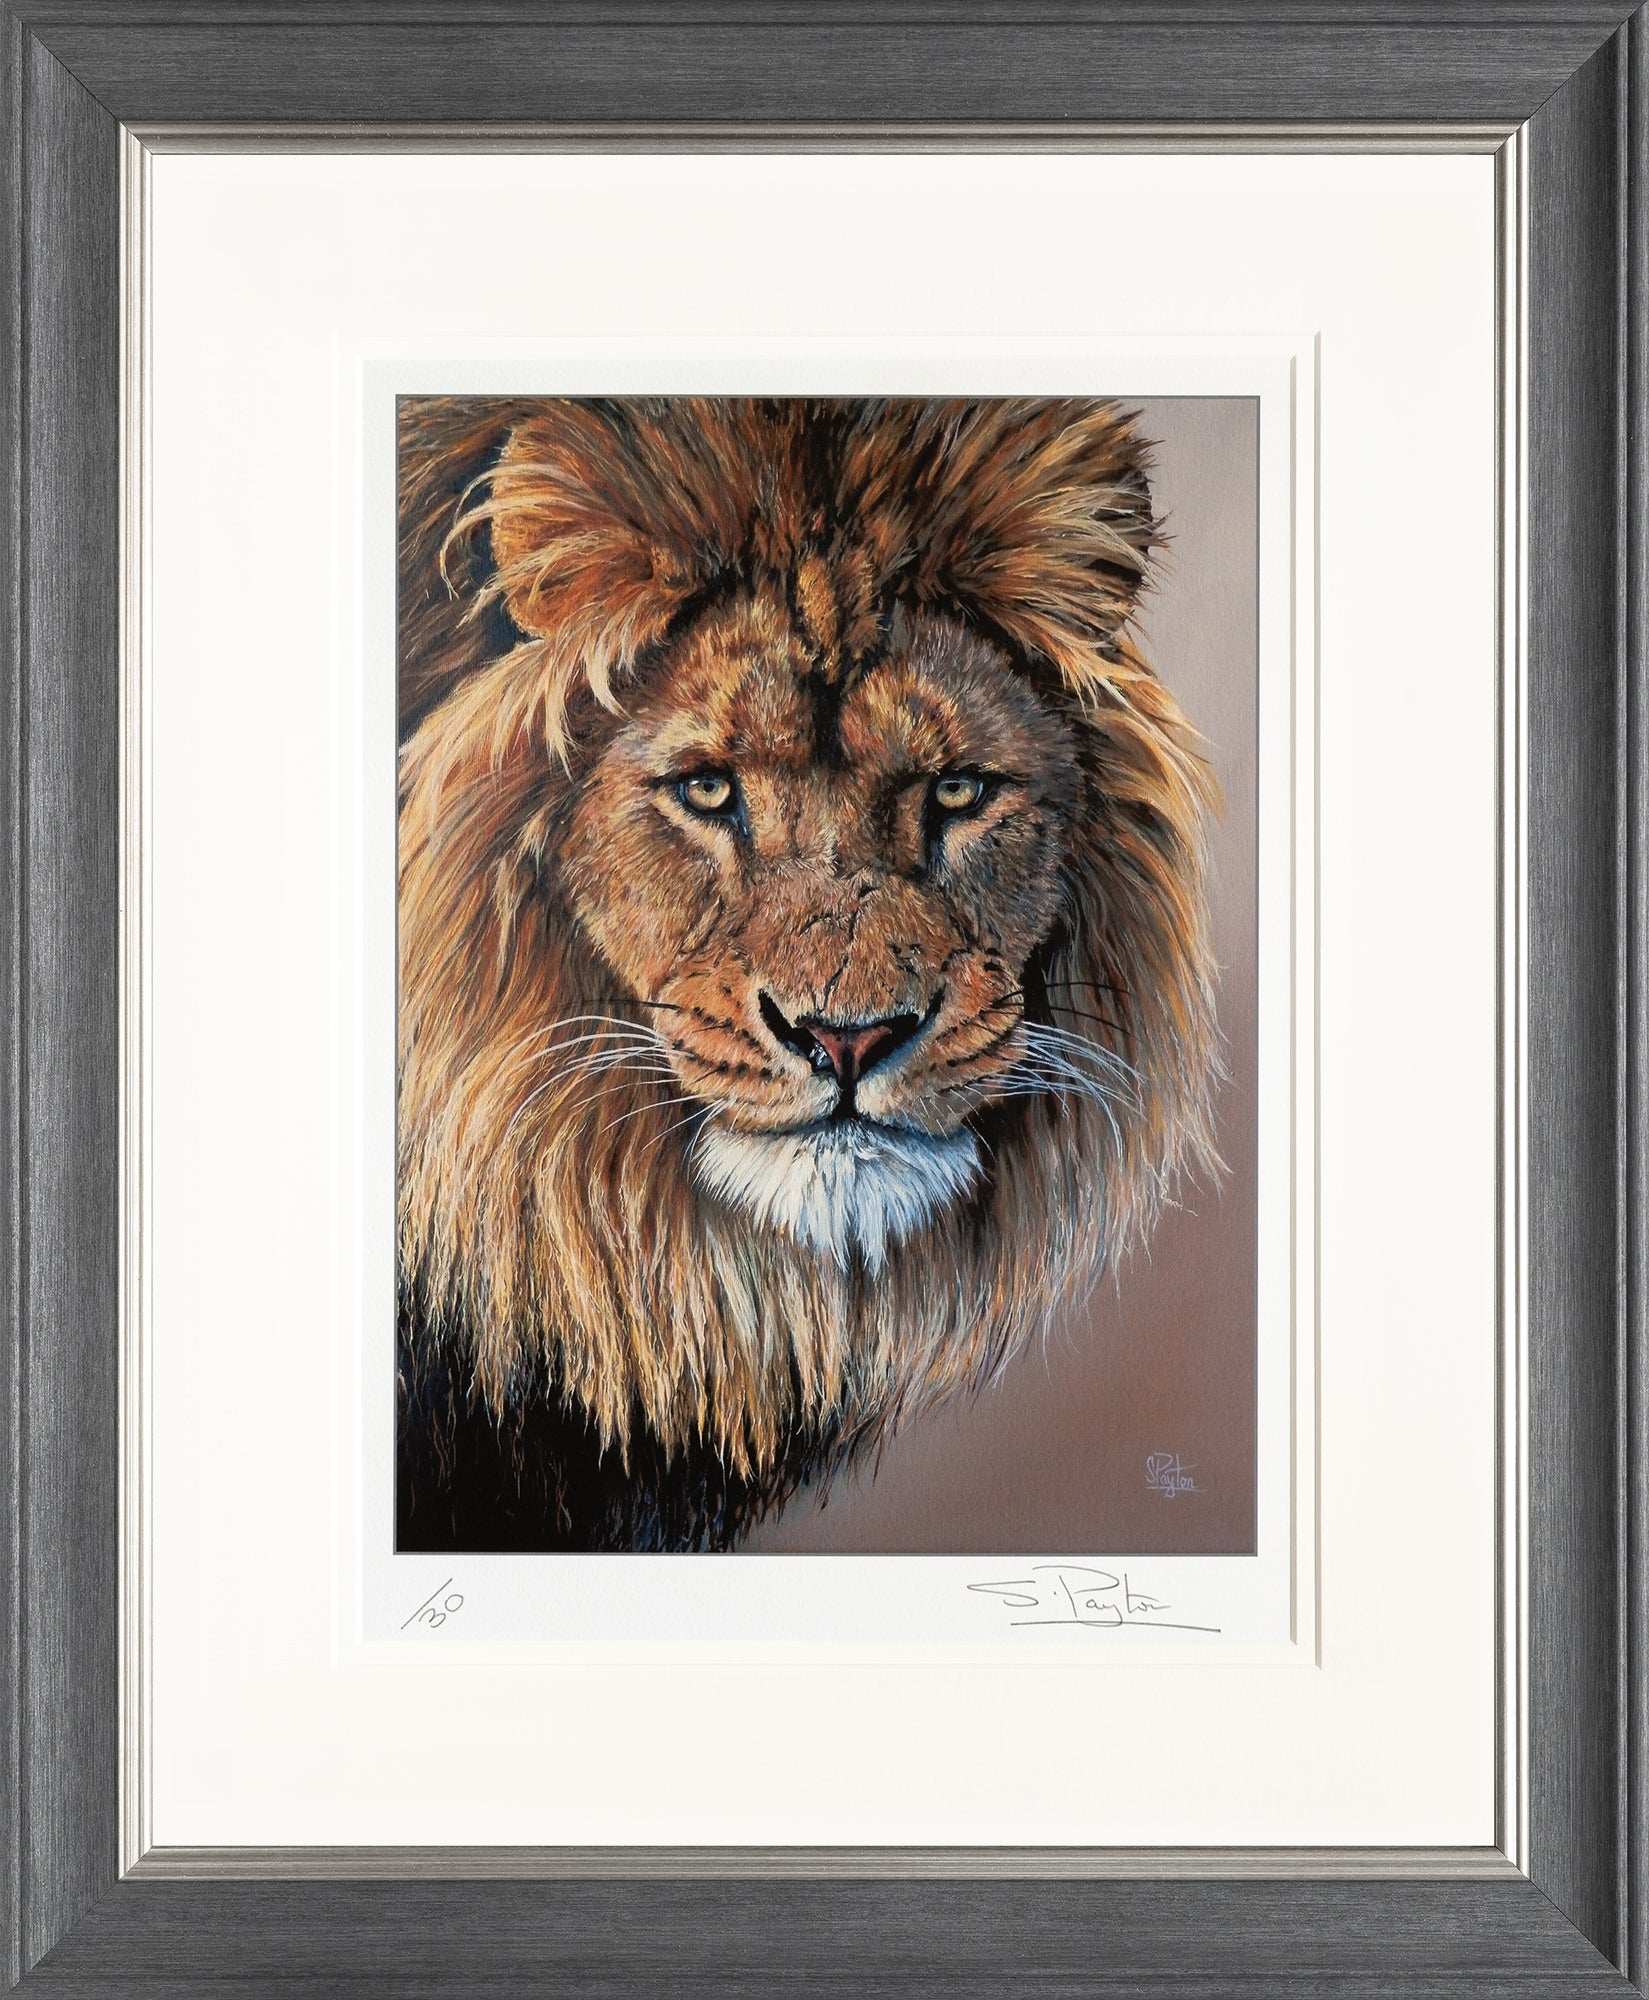 Lion's Stare limited edition print by Sue Payton